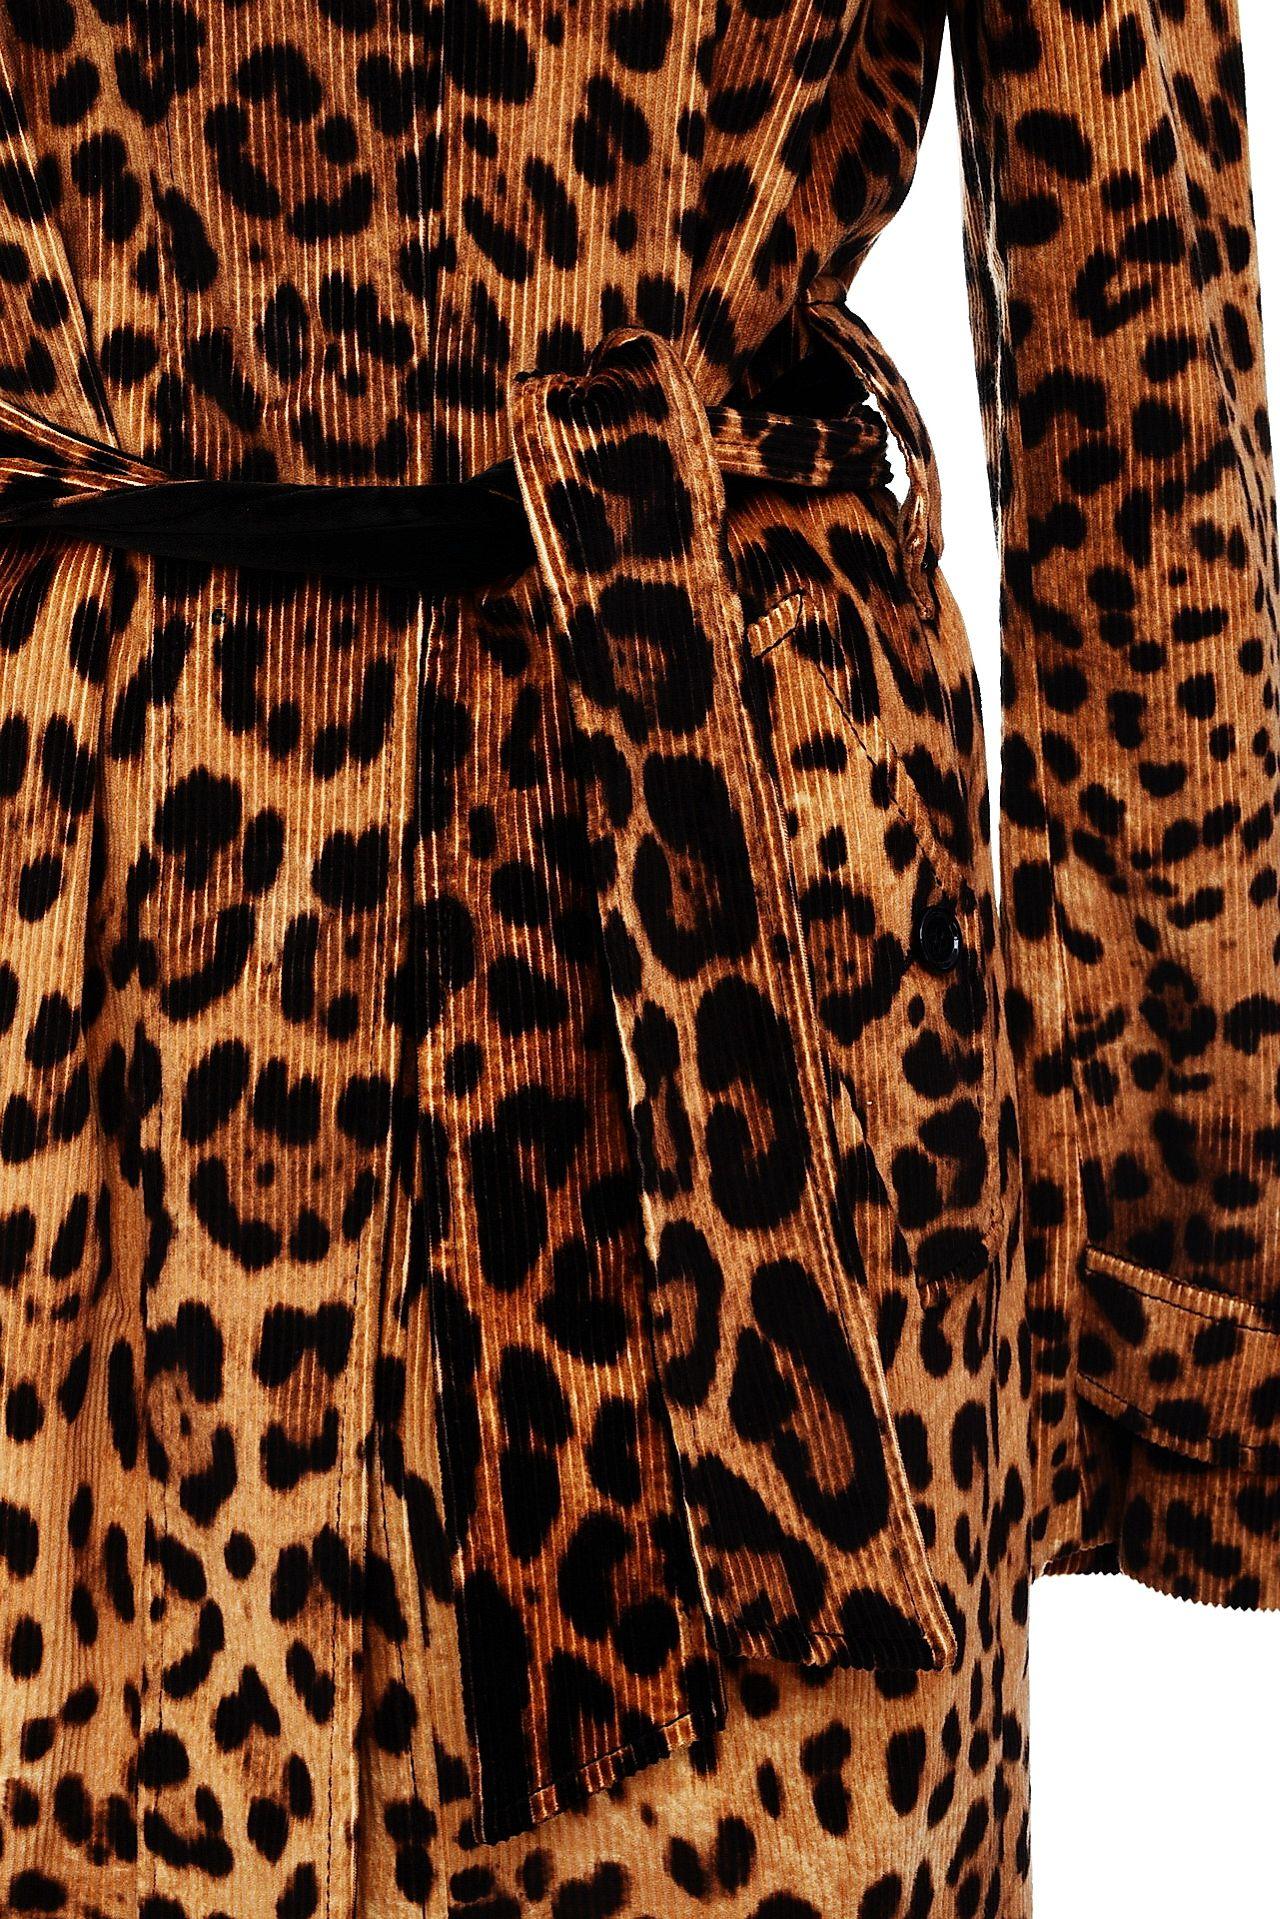 Dolce & Gabbana Leopard Printed Velvet Coat 44 - 8

96% Cotton,
2% Elastane,
2% Lycra

IT Size 44 - US 8

New, with tags